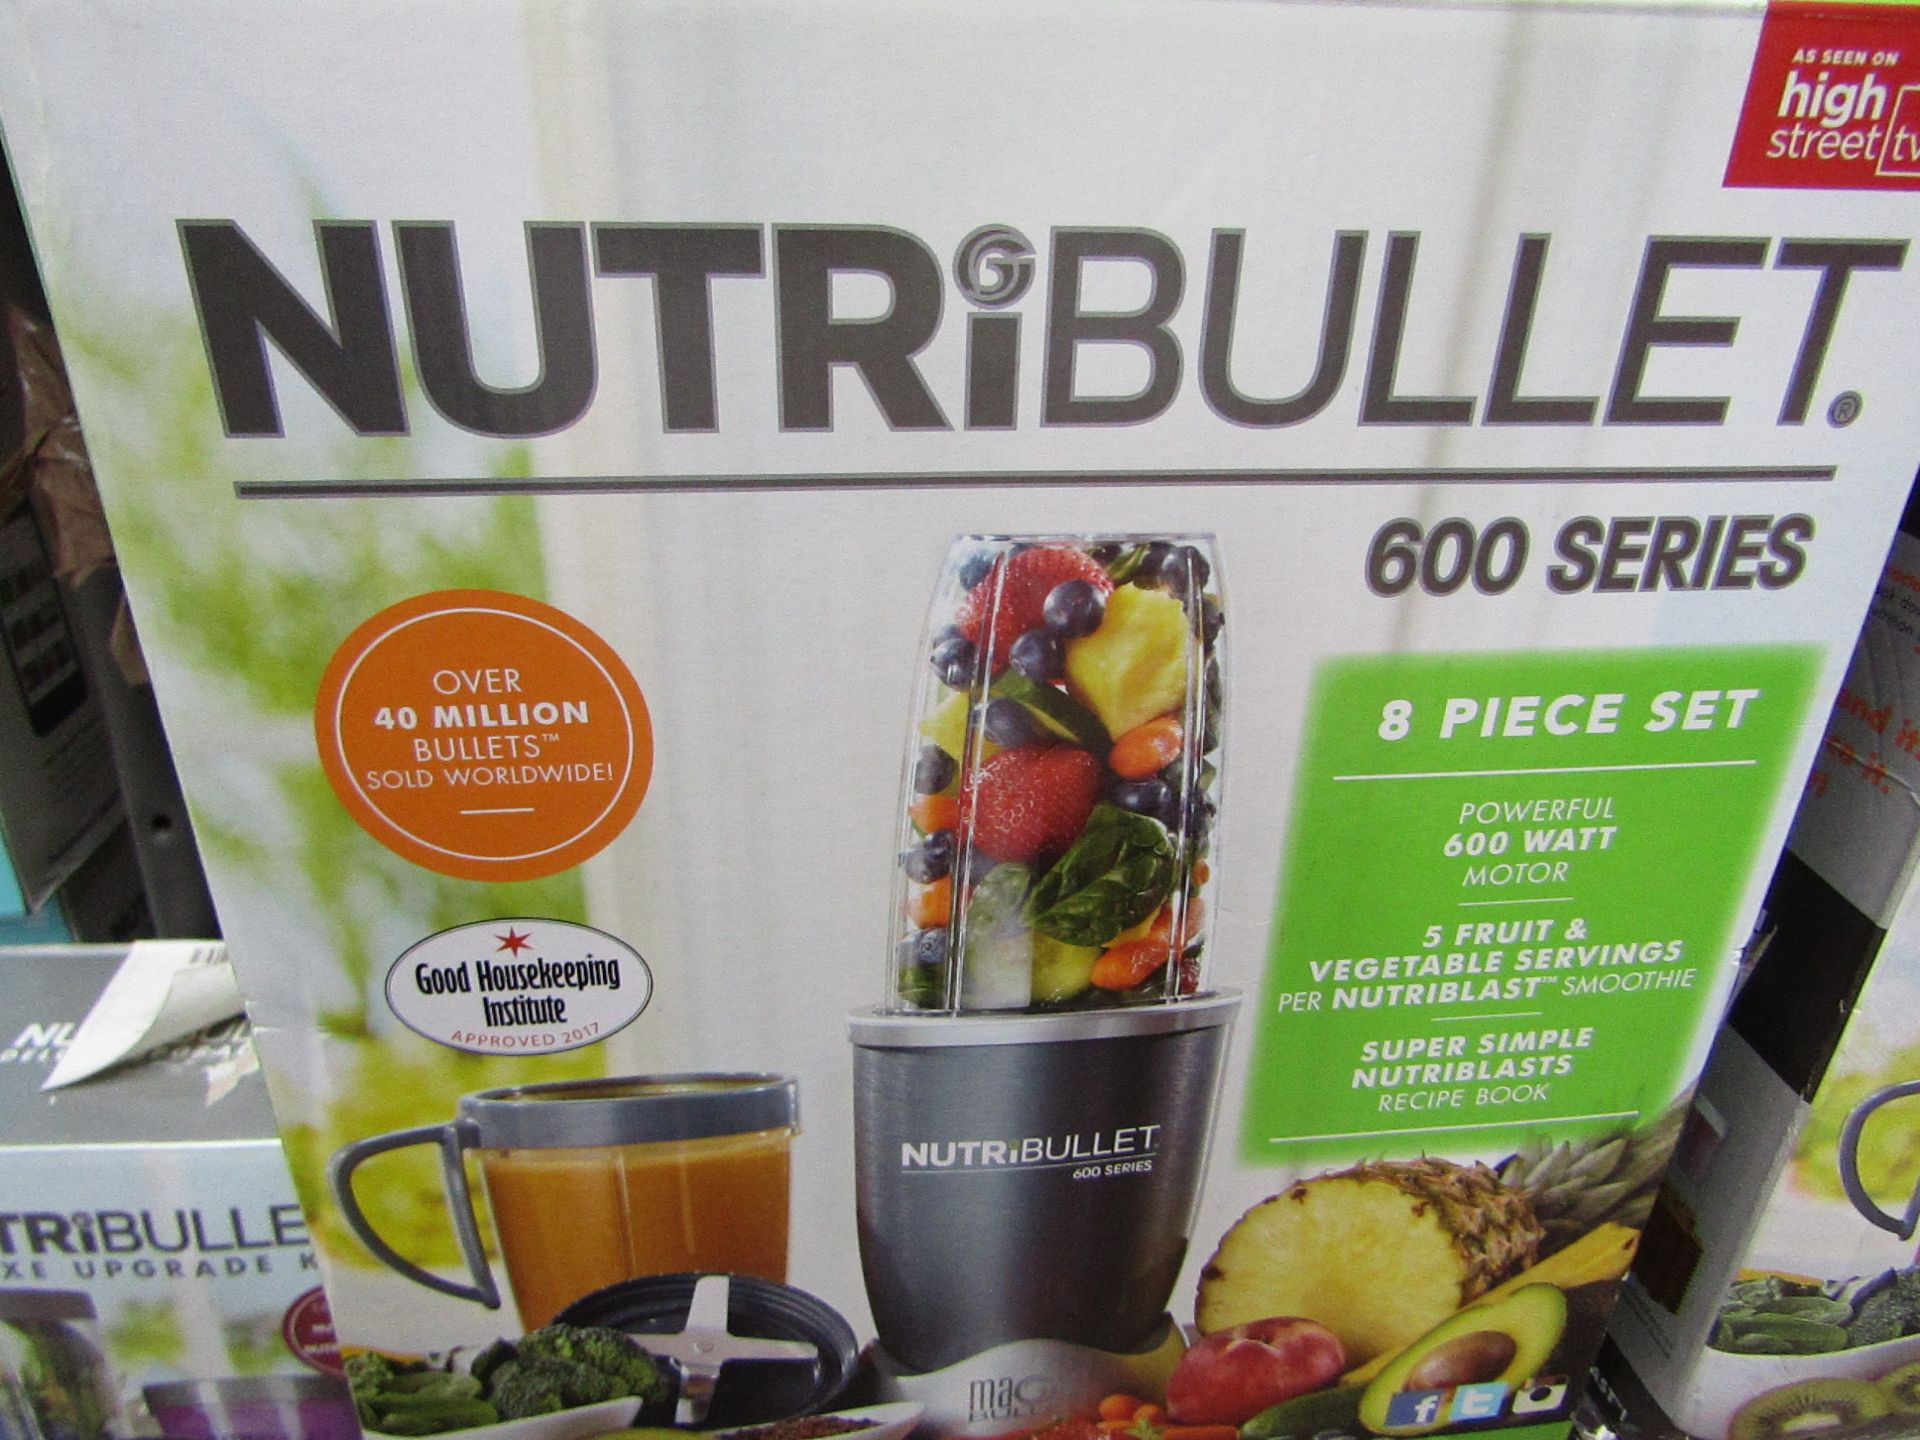 | 6x | NUTRI BULLET 600 SERIES | UNCHECKED AND BOXED | NO ONLINE RE-SALE | SKU C5060191462198 |